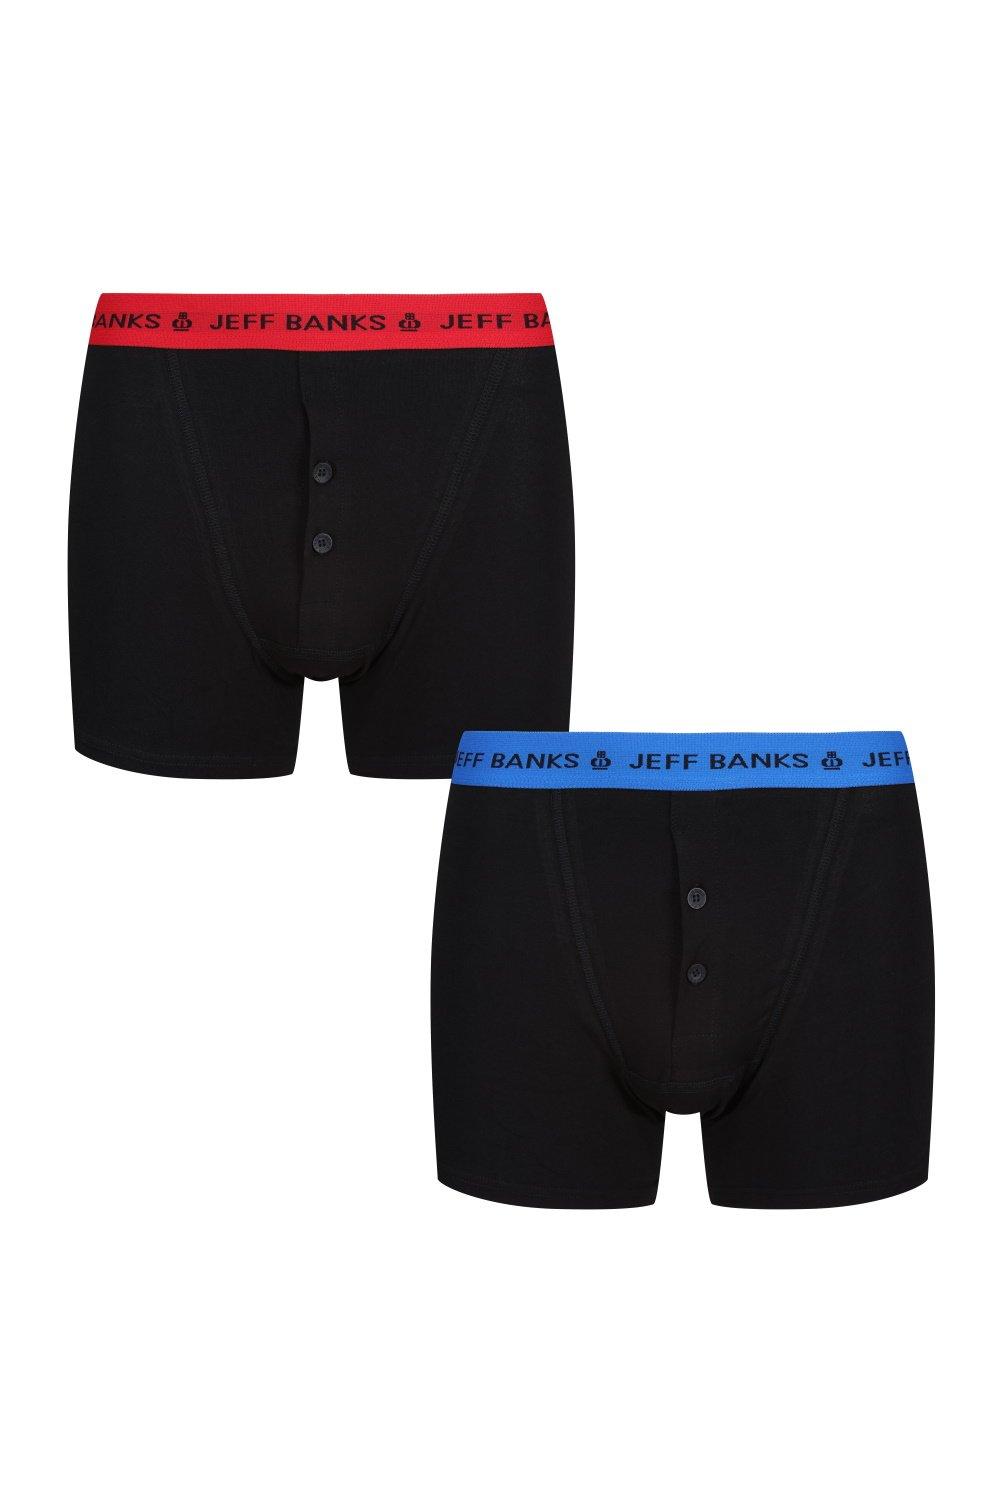 2 Pair Pack Button Fly Boxers